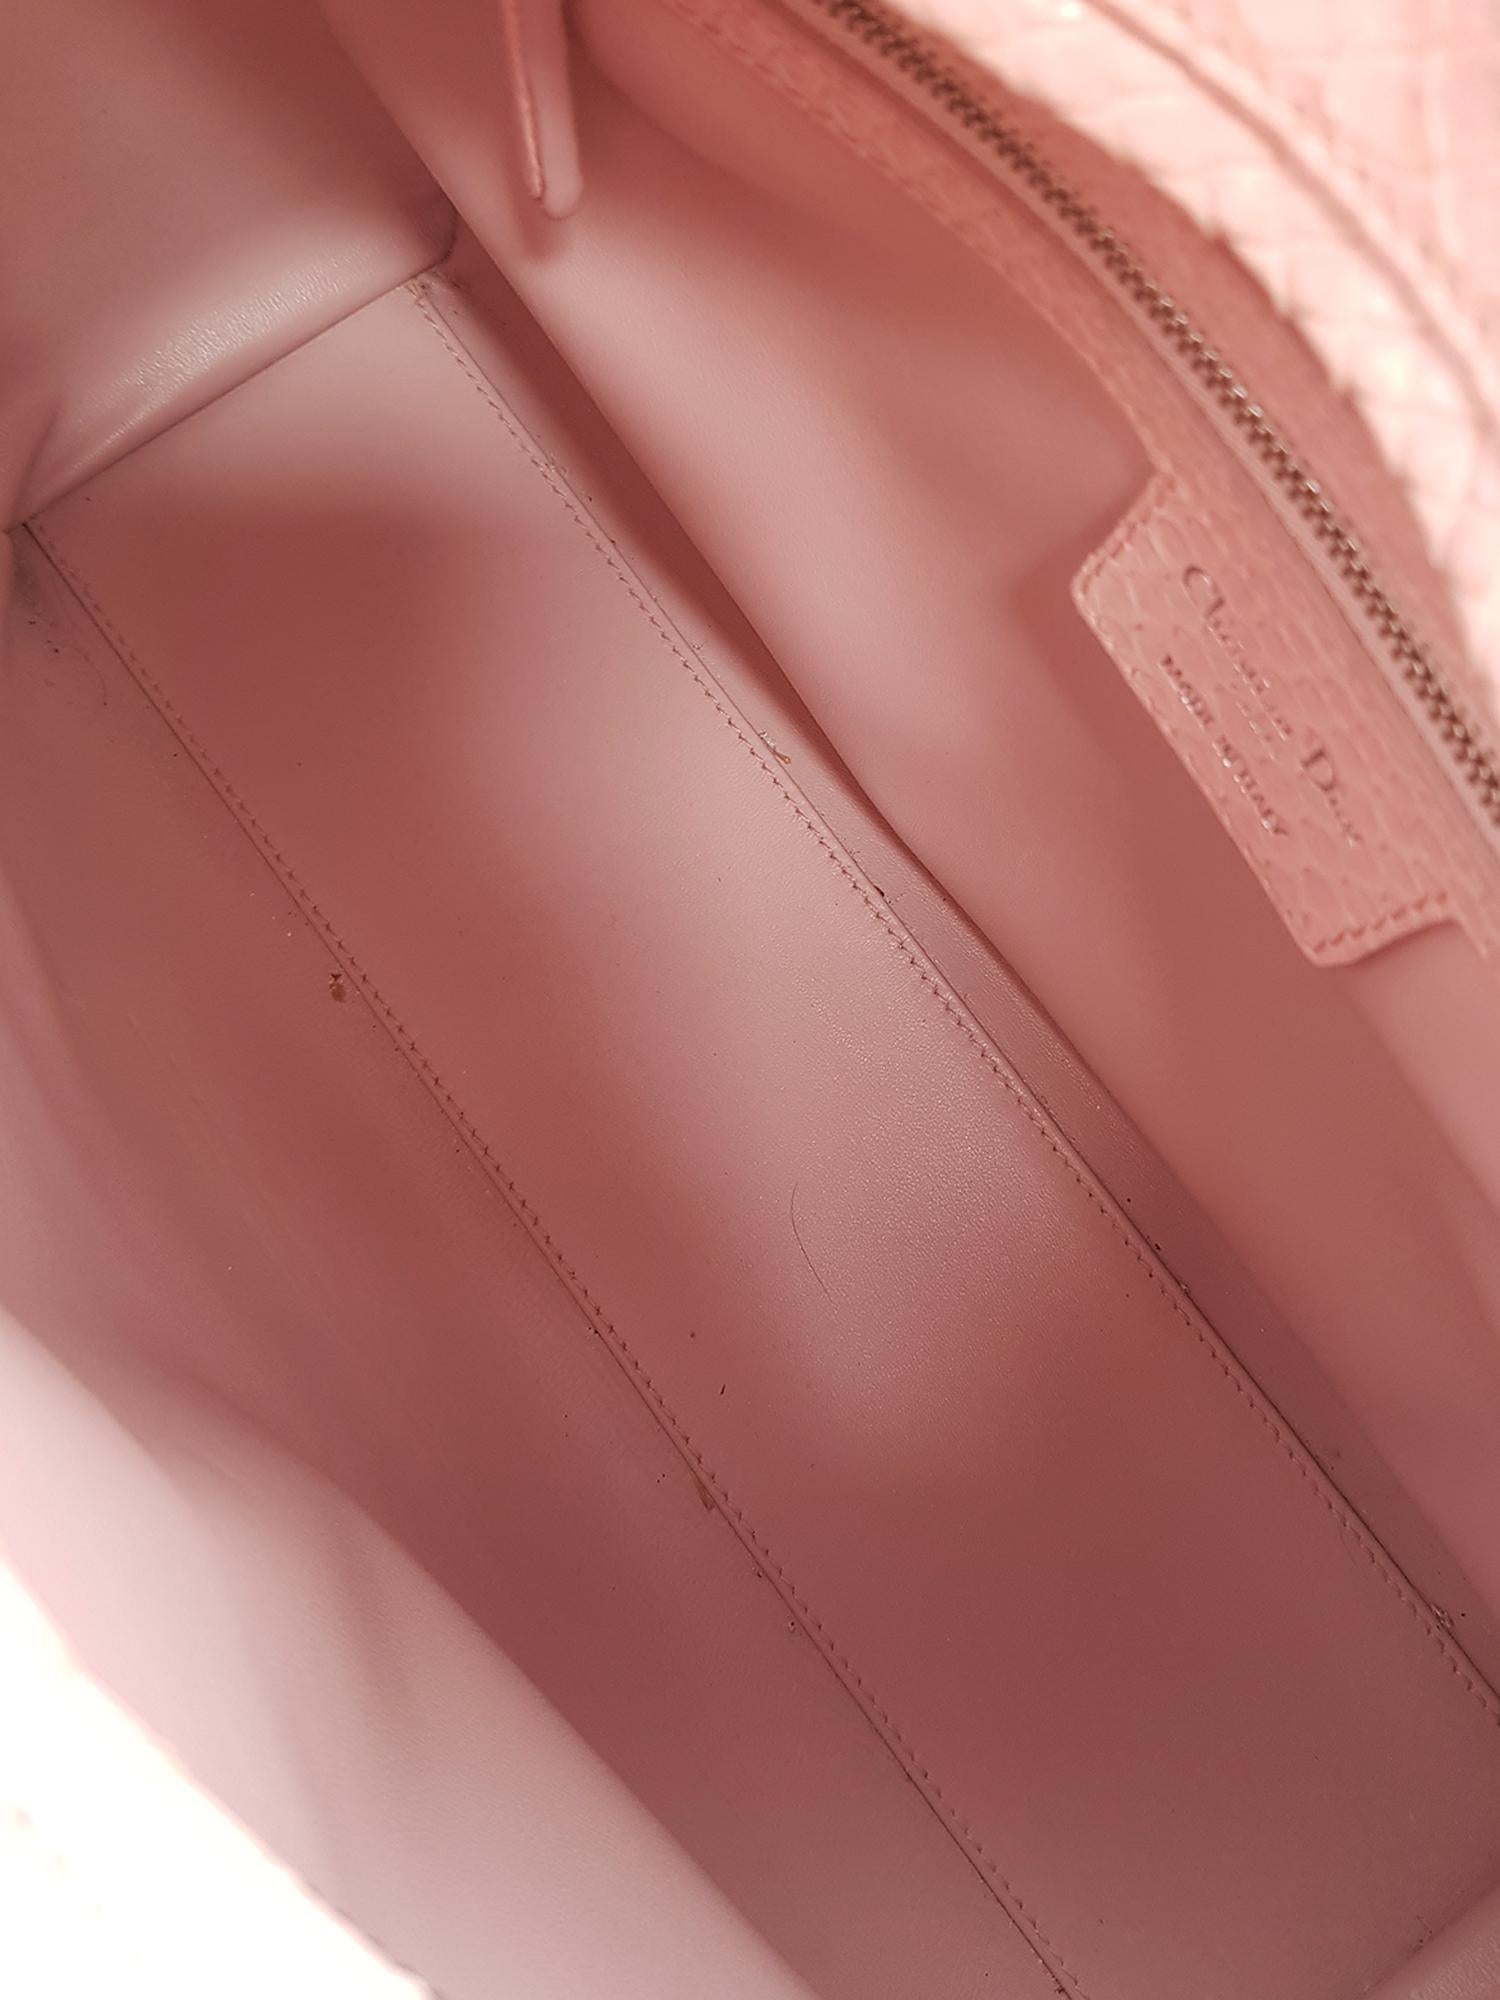 Dior Women's Shoulder Bag Lady Dior Pink Leather In Good Condition For Sale In Milan, IT